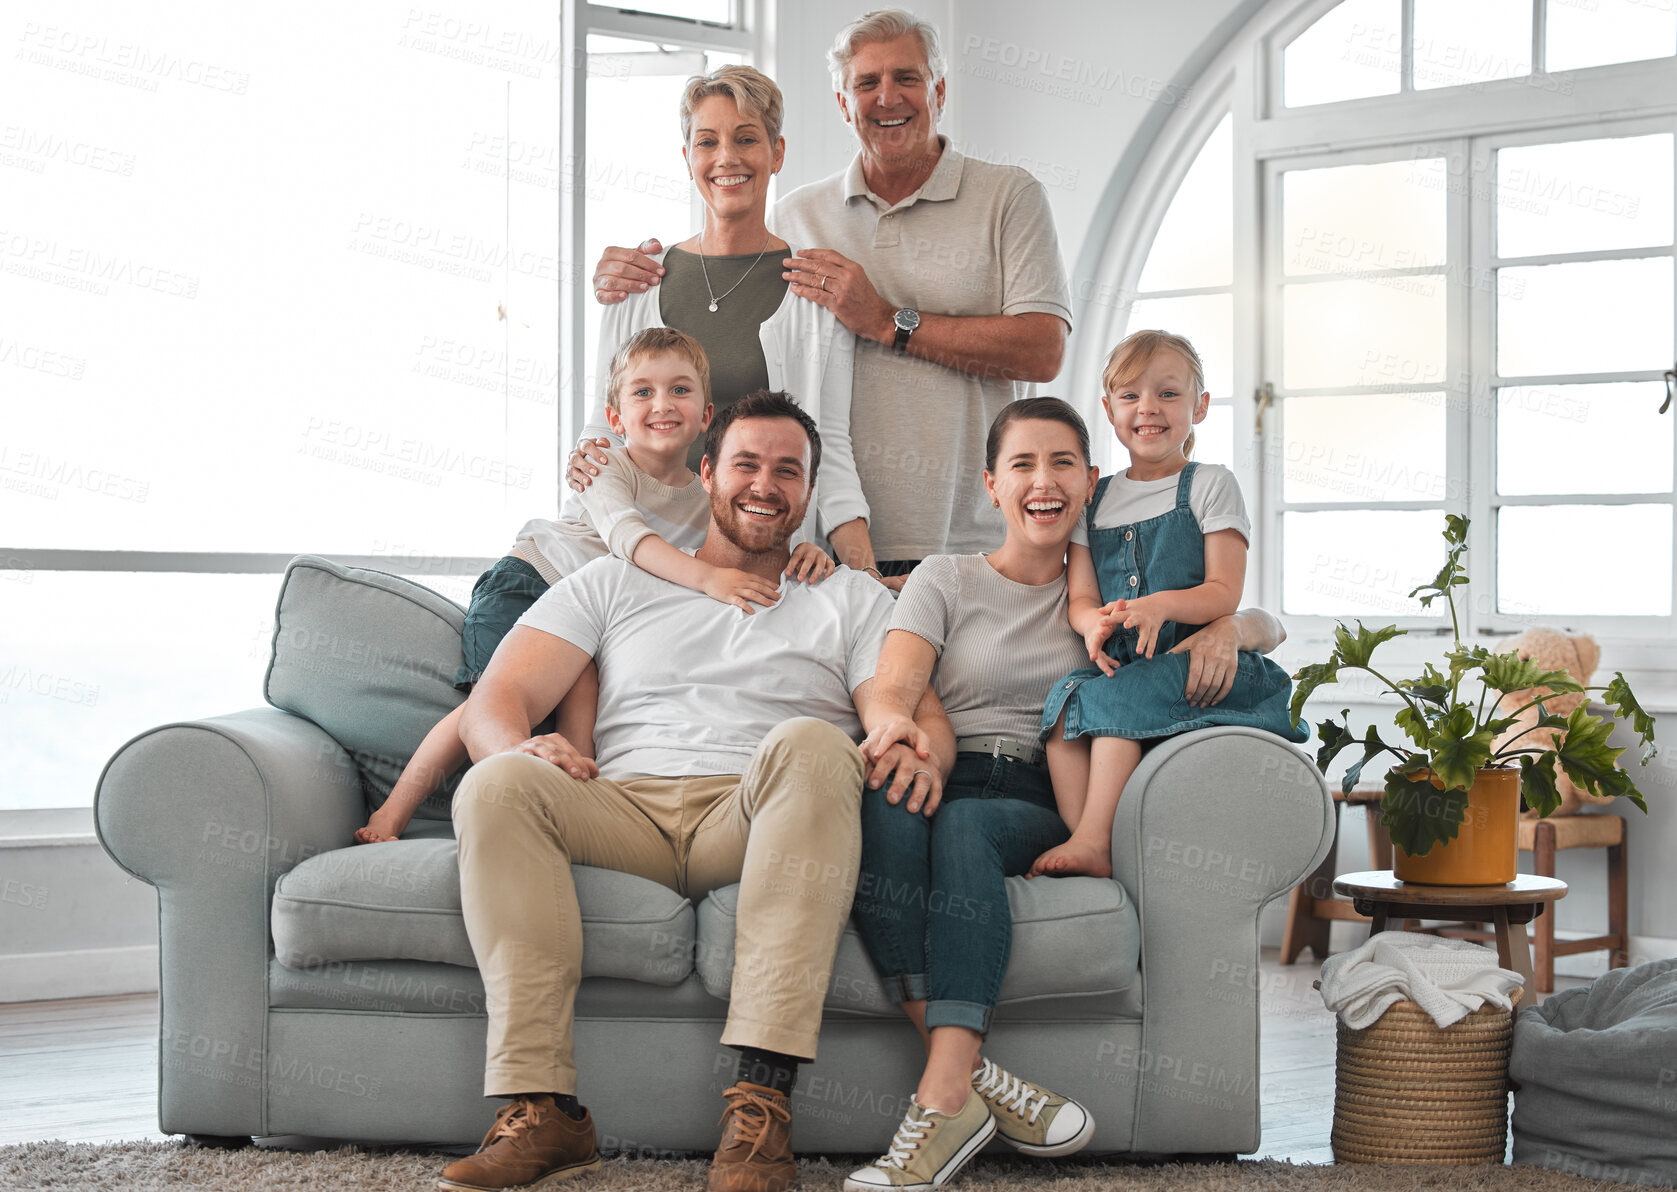 Buy stock photo Shot of a happy family relaxing on the sofa at home